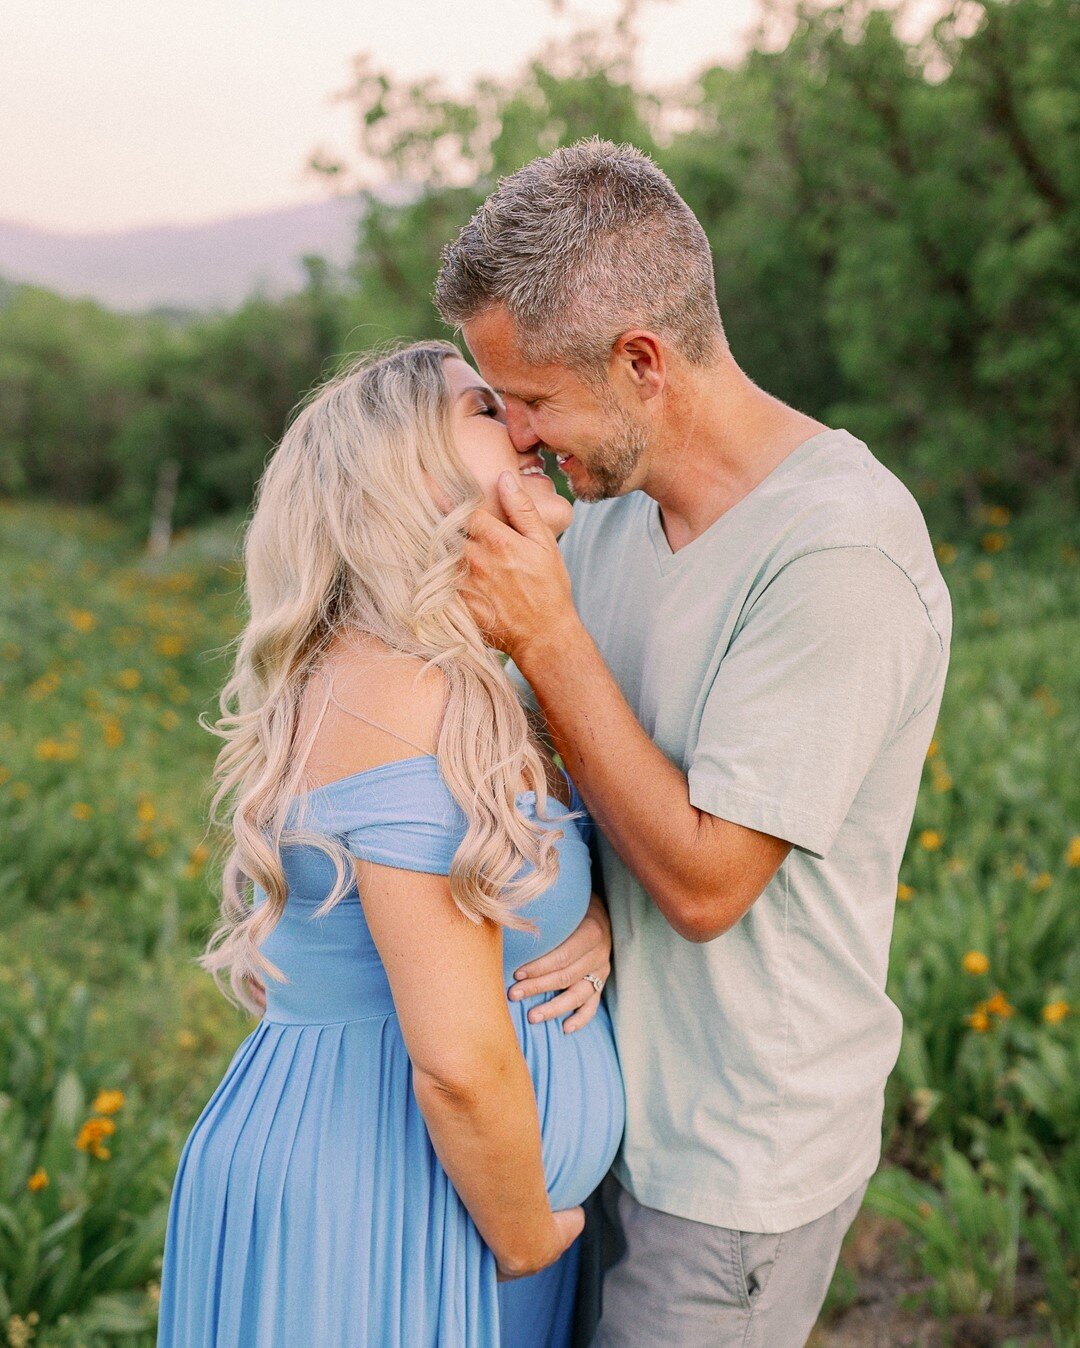 Maternity sessions are some of my favorite! Aren&rsquo;t these two just glowing?! ✨⠀⠀⠀⠀⠀⠀⠀⠀⠀
.⠀⠀⠀⠀⠀⠀⠀⠀⠀
.⠀⠀⠀⠀⠀⠀⠀⠀⠀
.⠀⠀⠀⠀⠀⠀⠀⠀⠀
#utahphotographer #maternityshoot #pregnancy #babybump #pregnantlife